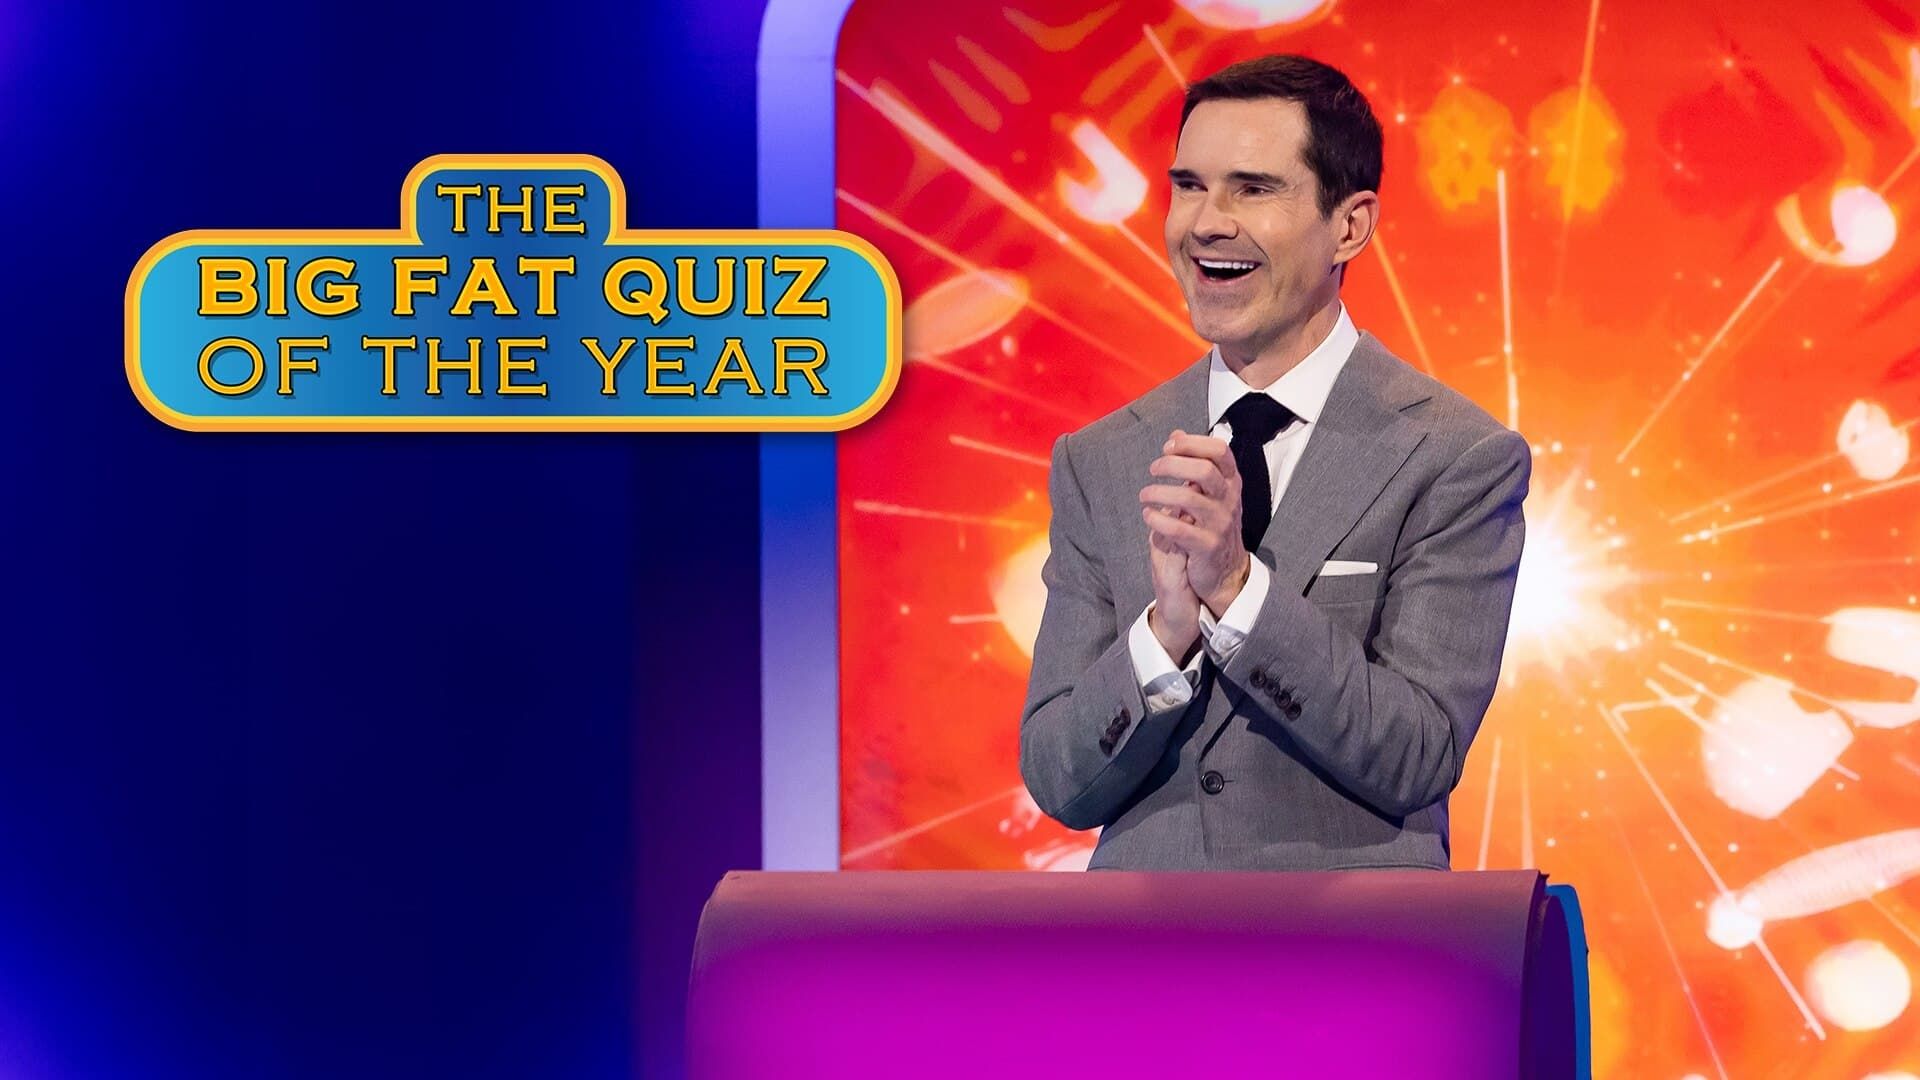 The Big Fat Quiz of the Year background